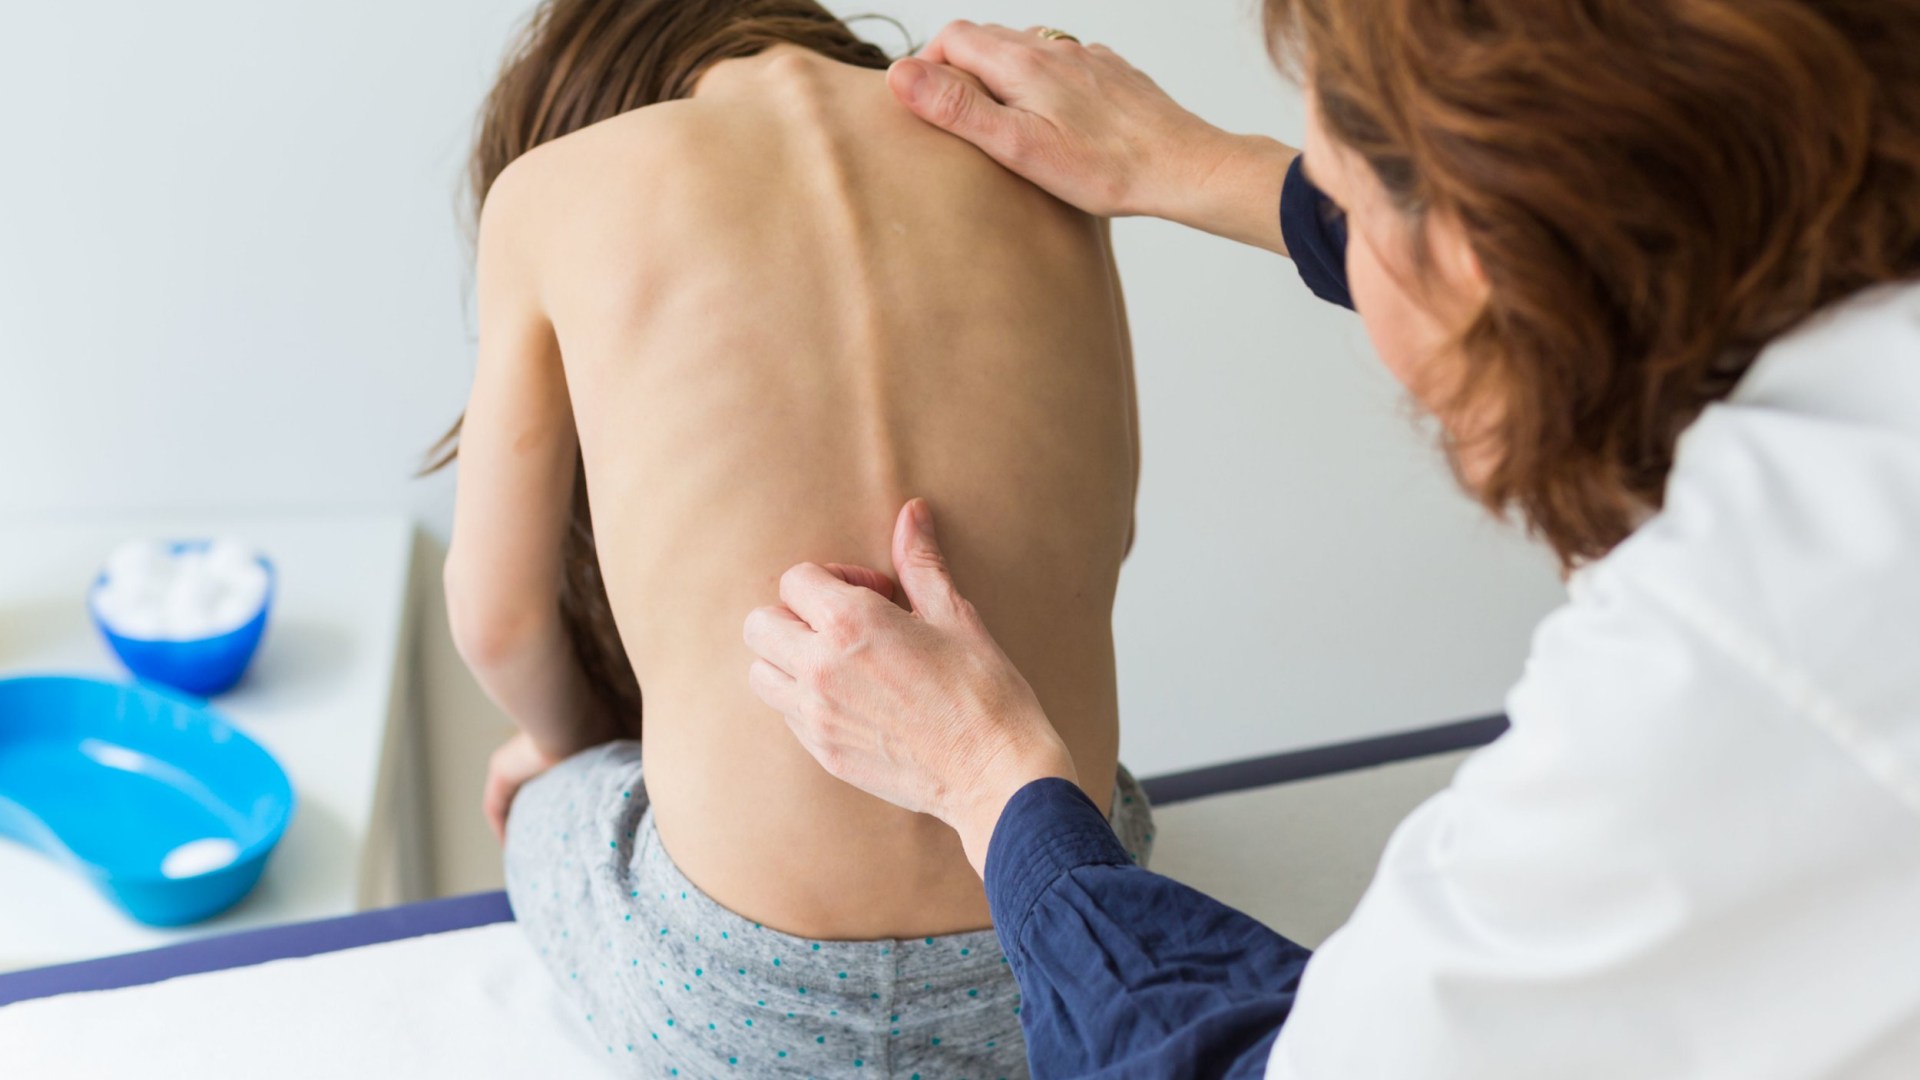 New law aims to end children’s scoliosis surgeries wait list pain as HSE would have ‘statutory duty’ to resolve crisis [Video]